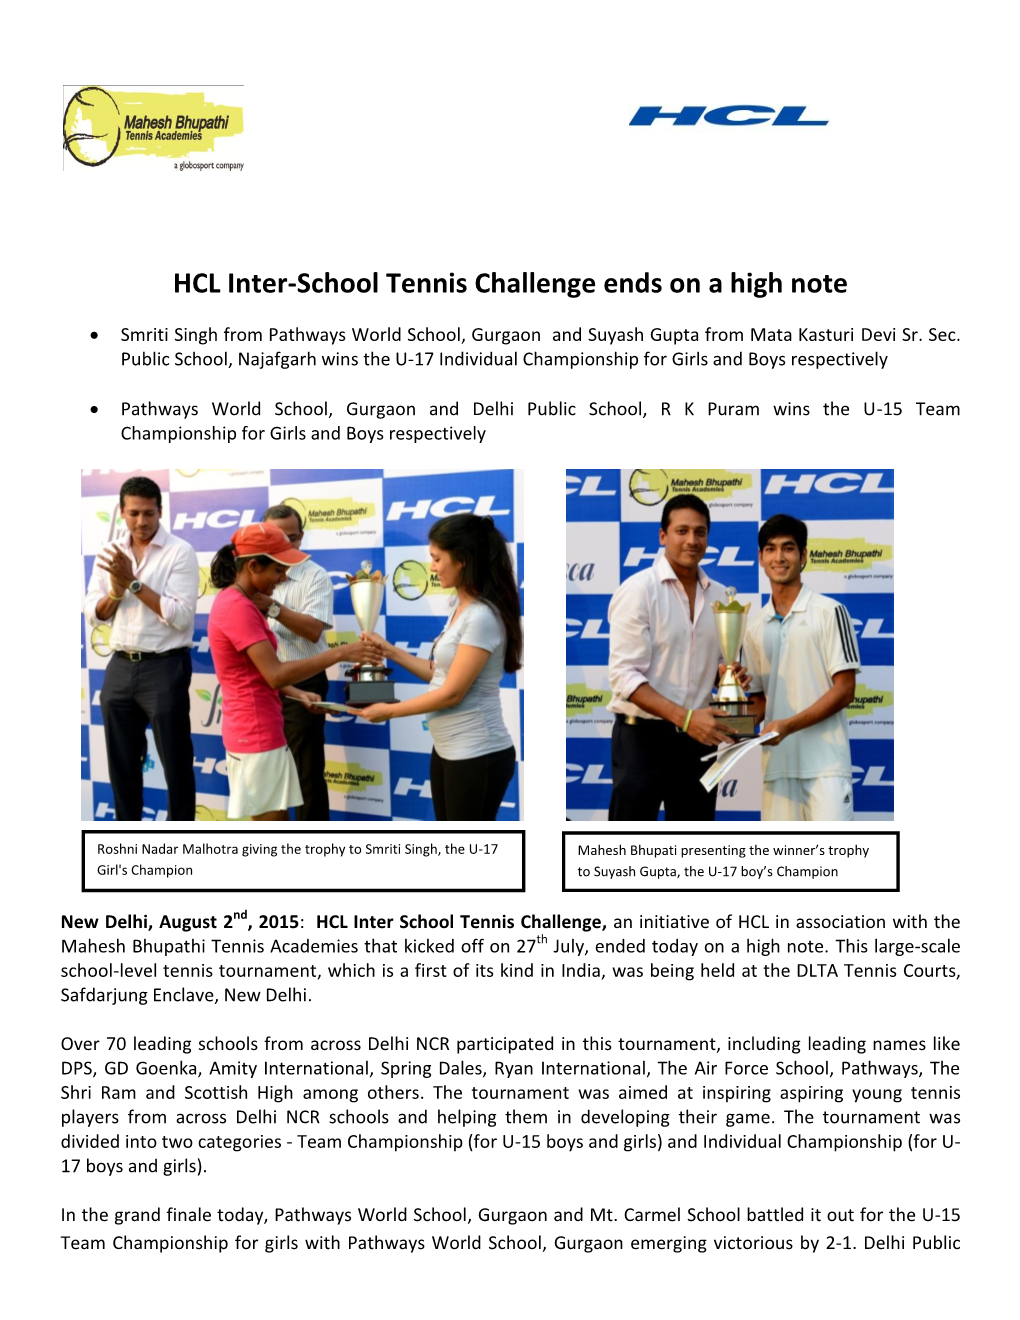 HCL Inter-School Tennis Challenge Ends on a High Note